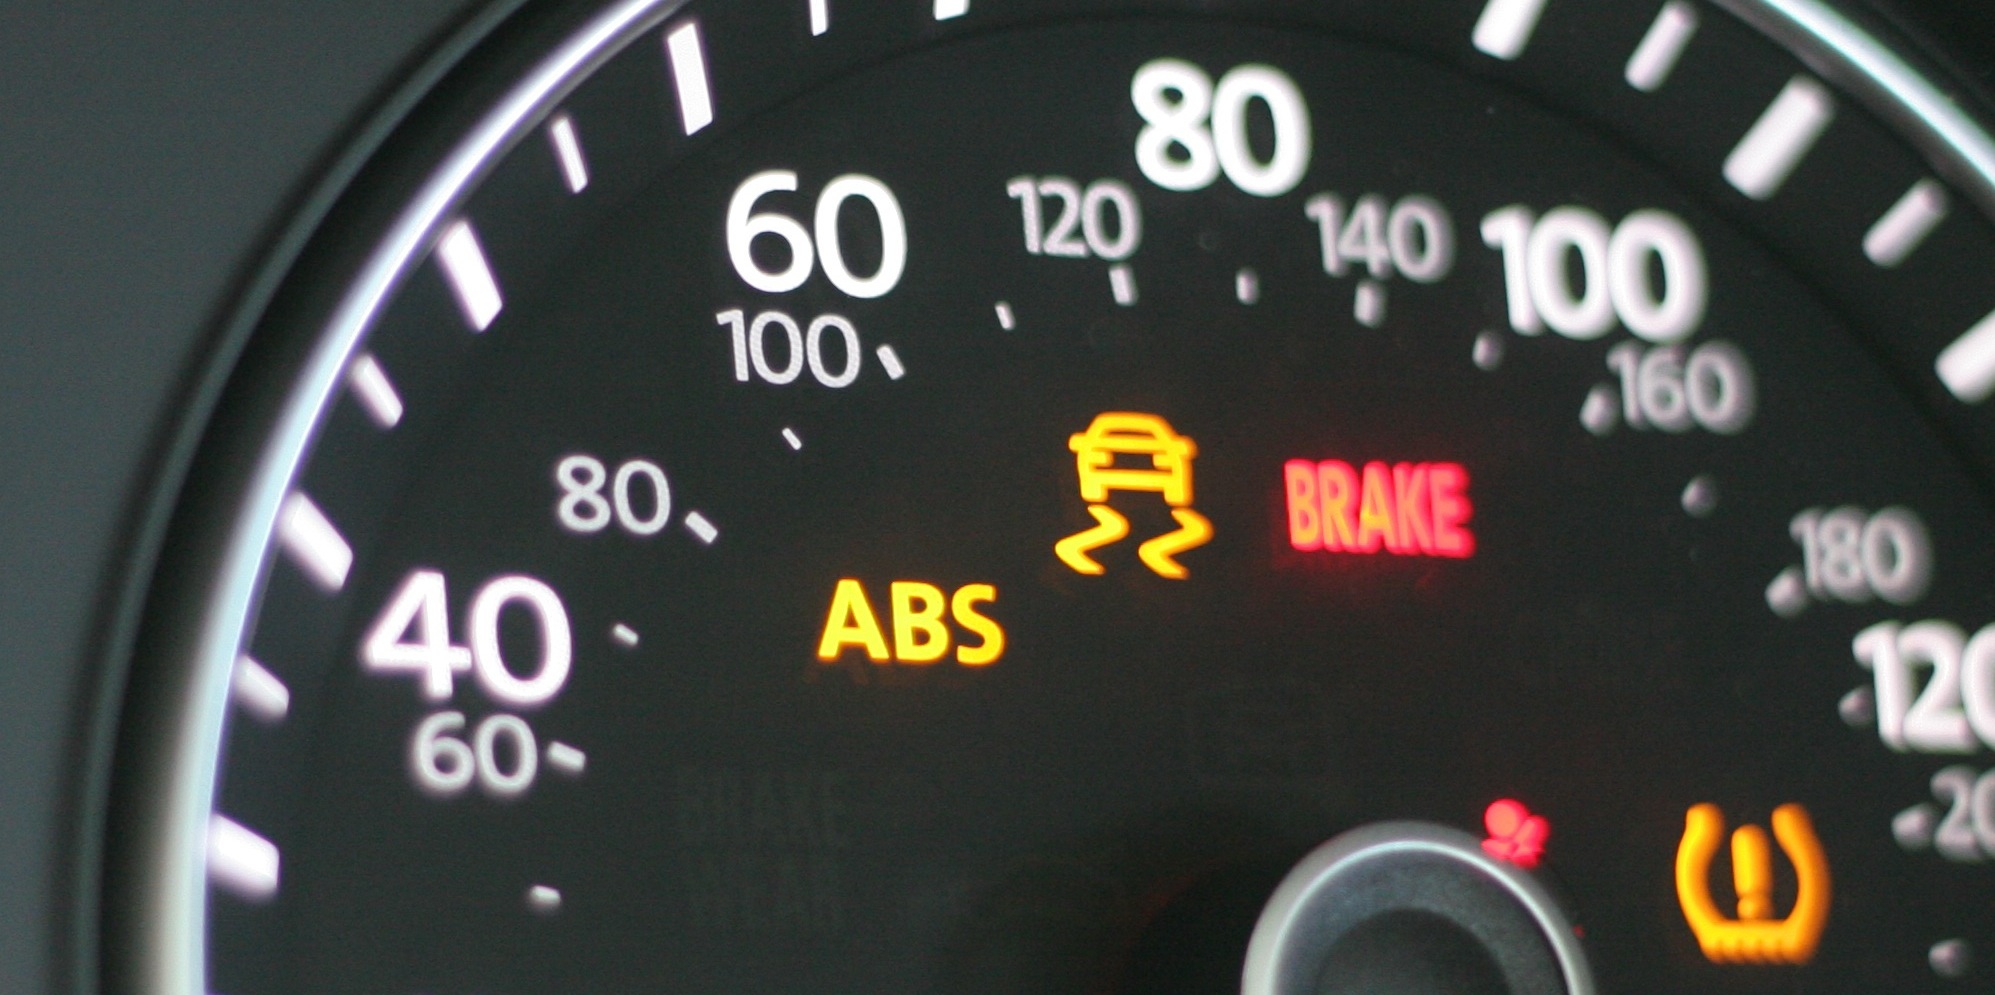 How can you troubleshoot problems with ABS brakes on a Ford vehicle?